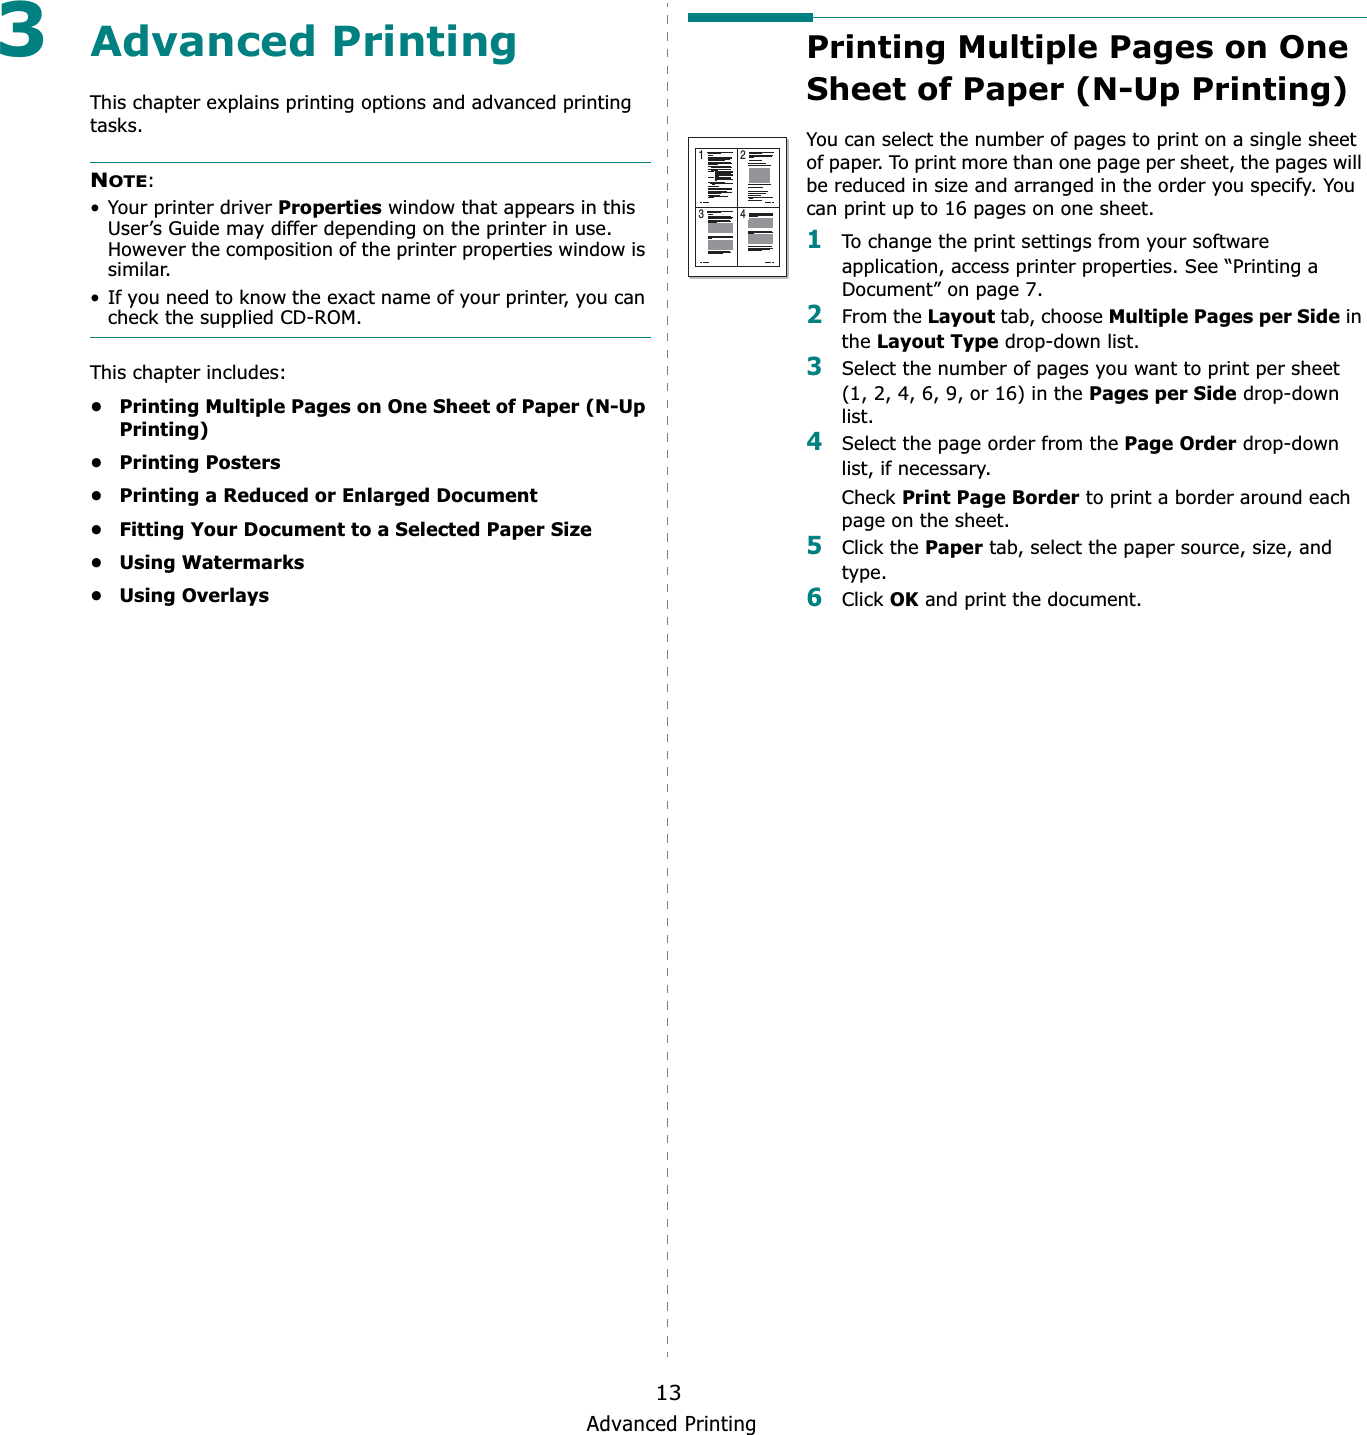 Advanced Printing133Advanced PrintingThis chapter explains printing options and advanced printing tasks. NOTE:• Your printer driver Properties window that appears in this User’s Guide may differ depending on the printer in use. However the composition of the printer properties window is similar.• If you need to know the exact name of your printer, you can check the supplied CD-ROM.This chapter includes:• Printing Multiple Pages on One Sheet of Paper (N-Up Printing)•Printing Posters• Printing a Reduced or Enlarged Document• Fitting Your Document to a Selected Paper Size• Using Watermarks• Using OverlaysPrinting Multiple Pages on One Sheet of Paper (N-Up Printing) You can select the number of pages to print on a single sheet of paper. To print more than one page per sheet, the pages will be reduced in size and arranged in the order you specify. You can print up to 16 pages on one sheet.  1To change the print settings from your software application, access printer properties. See “Printing a Document” on page 7.2From the Layout tab, choose Multiple Pages per Side in the Layout Type drop-down list. 3Select the number of pages you want to print per sheet (1, 2, 4, 6, 9, or 16) in the Pages per Side drop-down list.4Select the page order from the Page Order drop-down list, if necessary.Check Print Page Border to print a border around each page on the sheet. 5Click the Paper tab, select the paper source, size, and type.6Click OK and print the document. 1 23 4